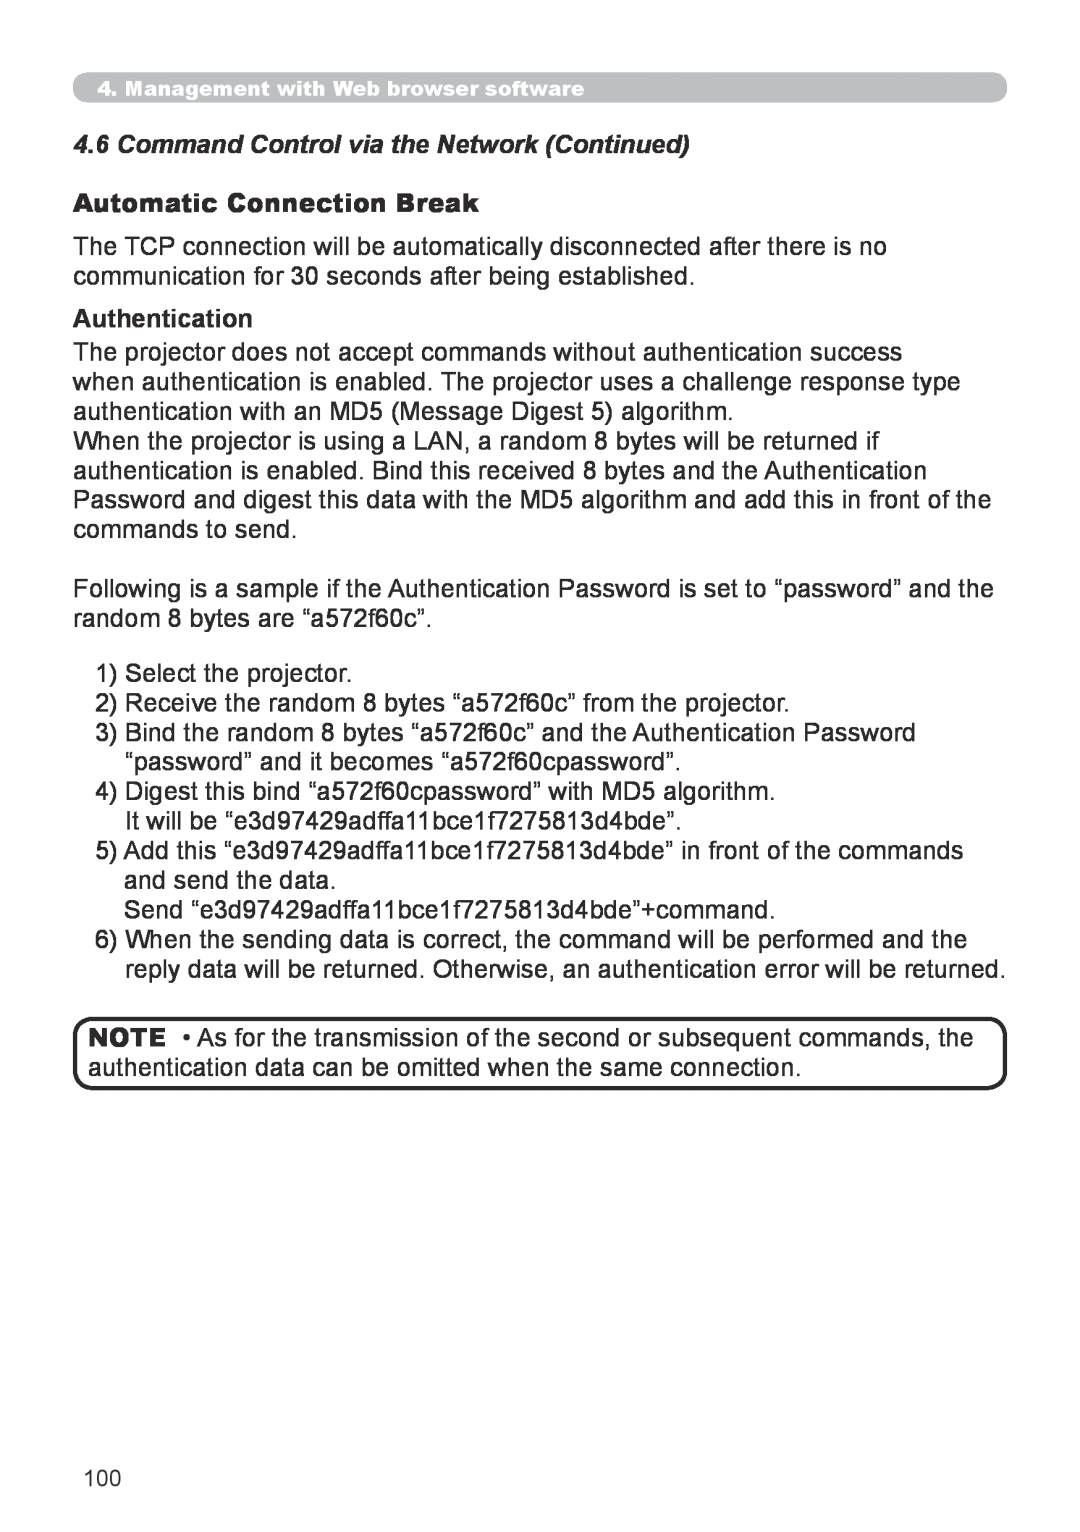 Hitachi CP-X267 user manual Automatic Connection Break, Authentication, 4.6Command Control via the Network Continued 